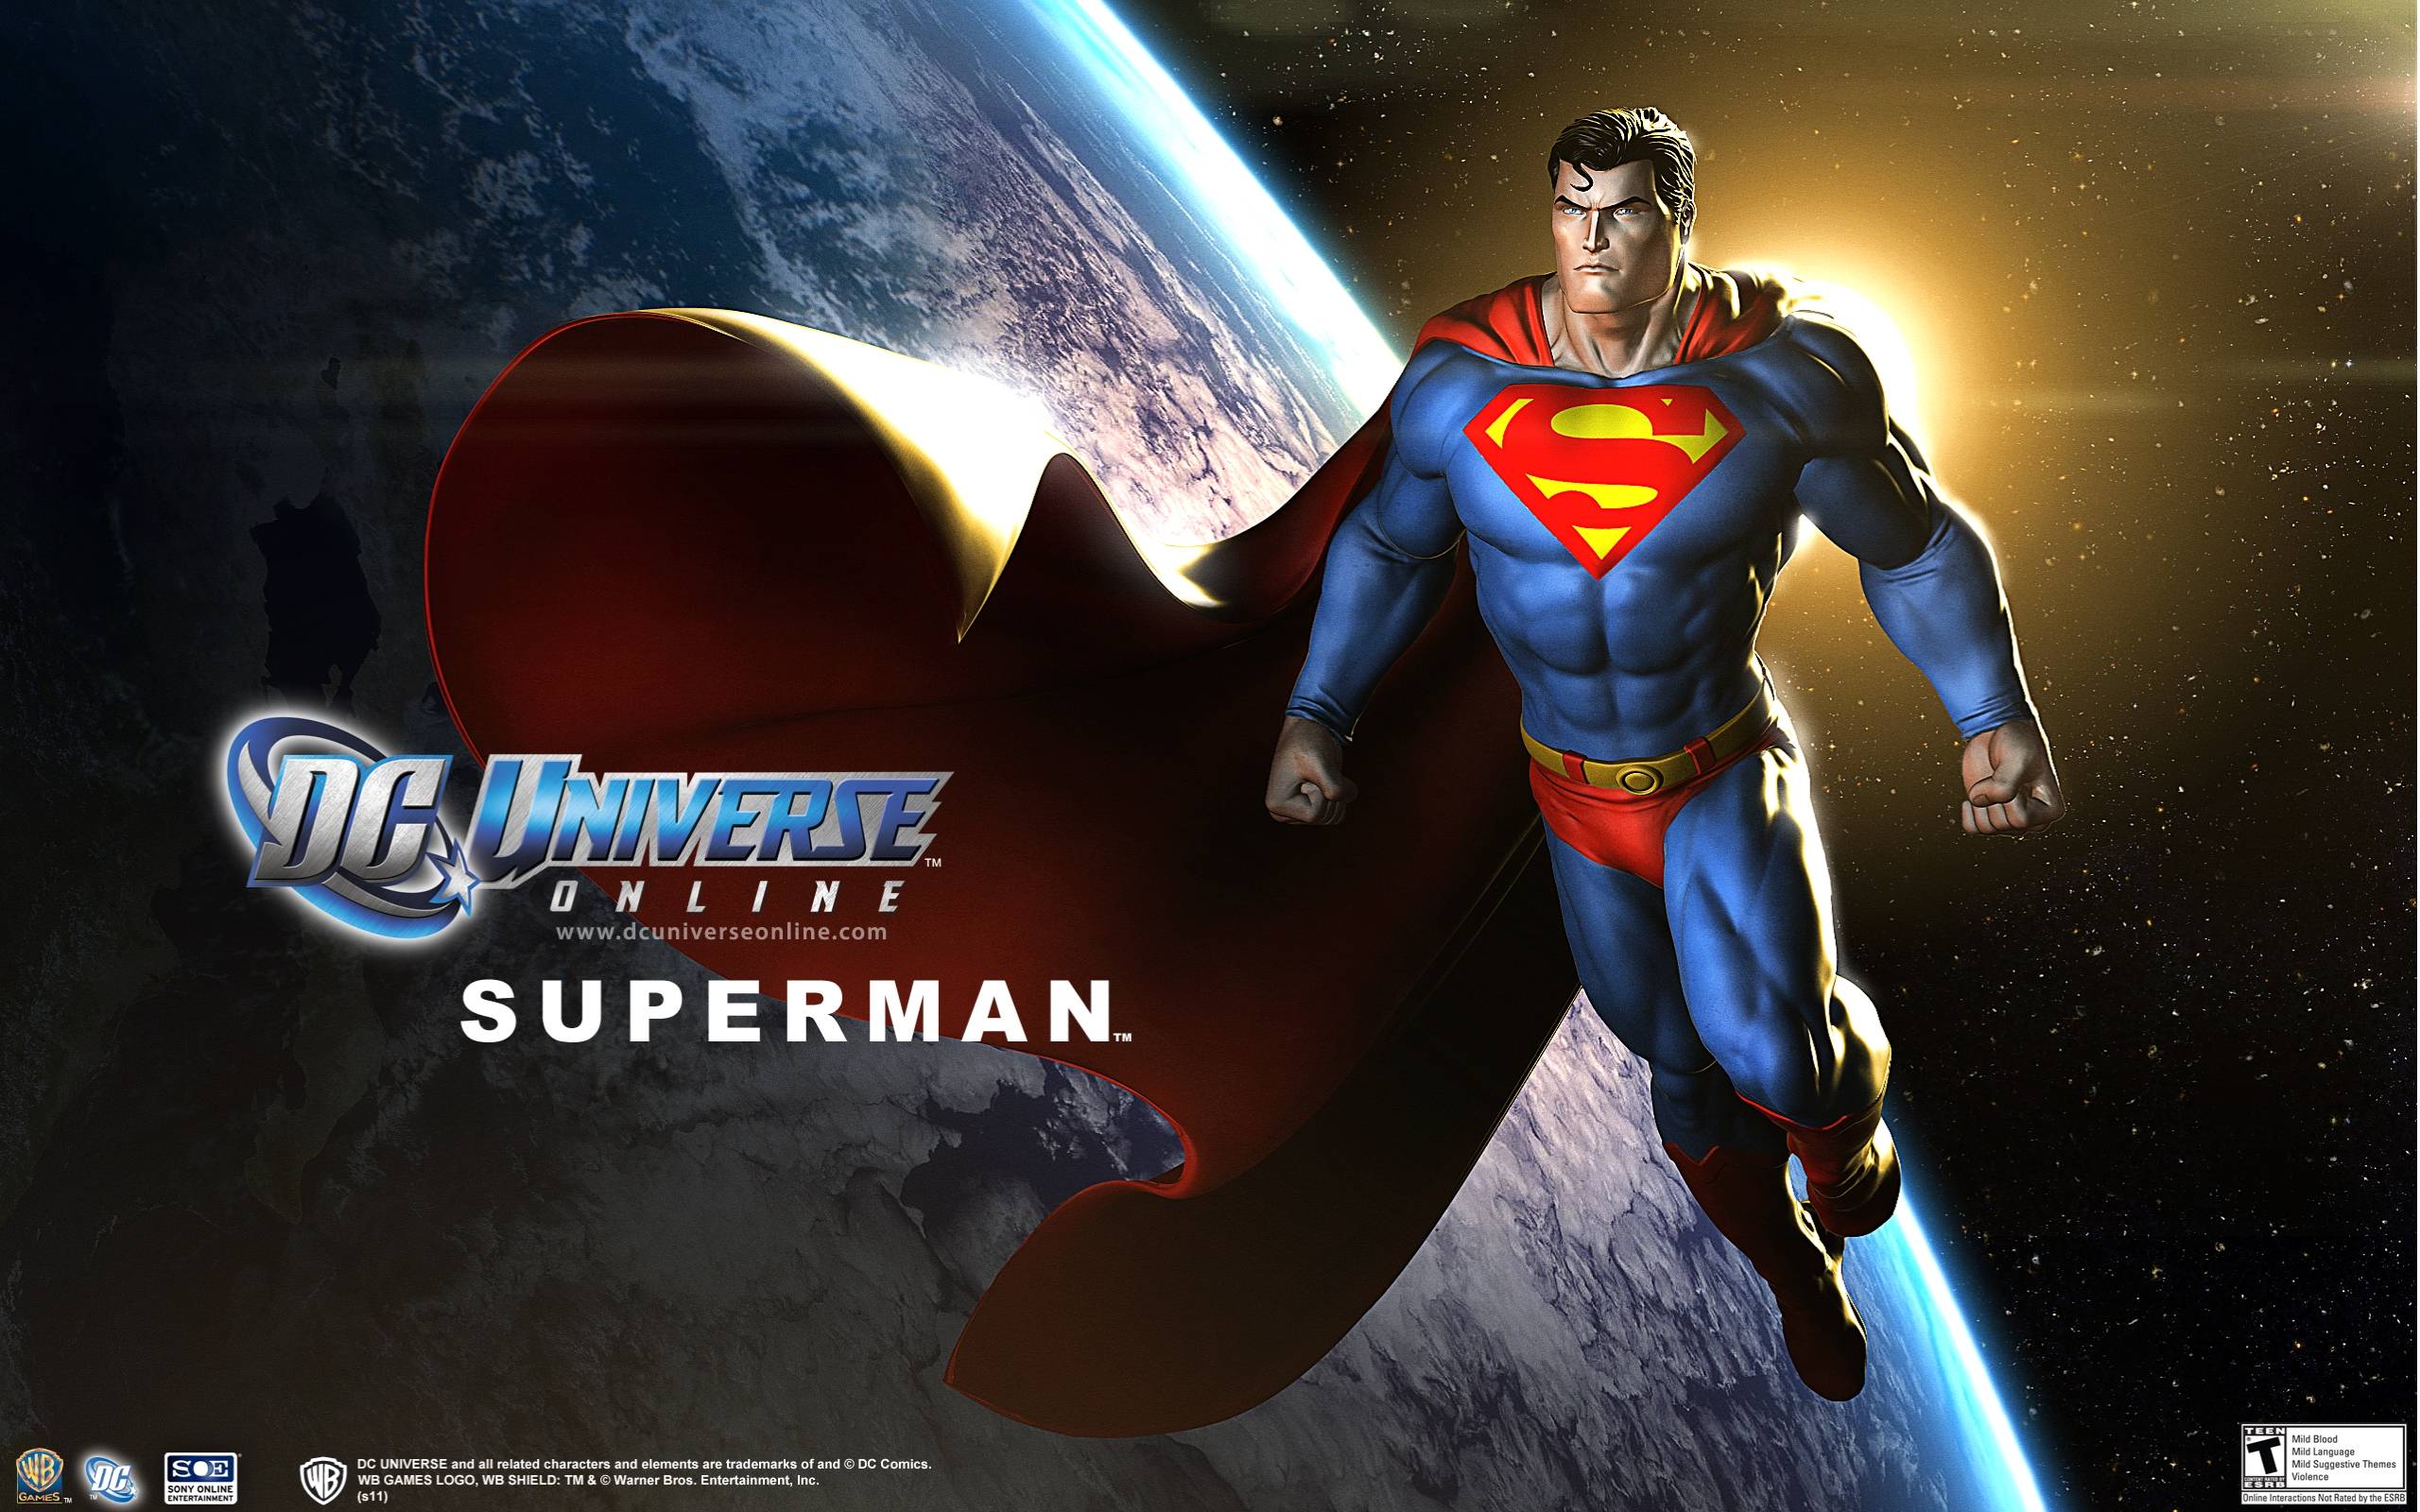 DC Universe Online Goes Live in Southeast Asian Countries. Where